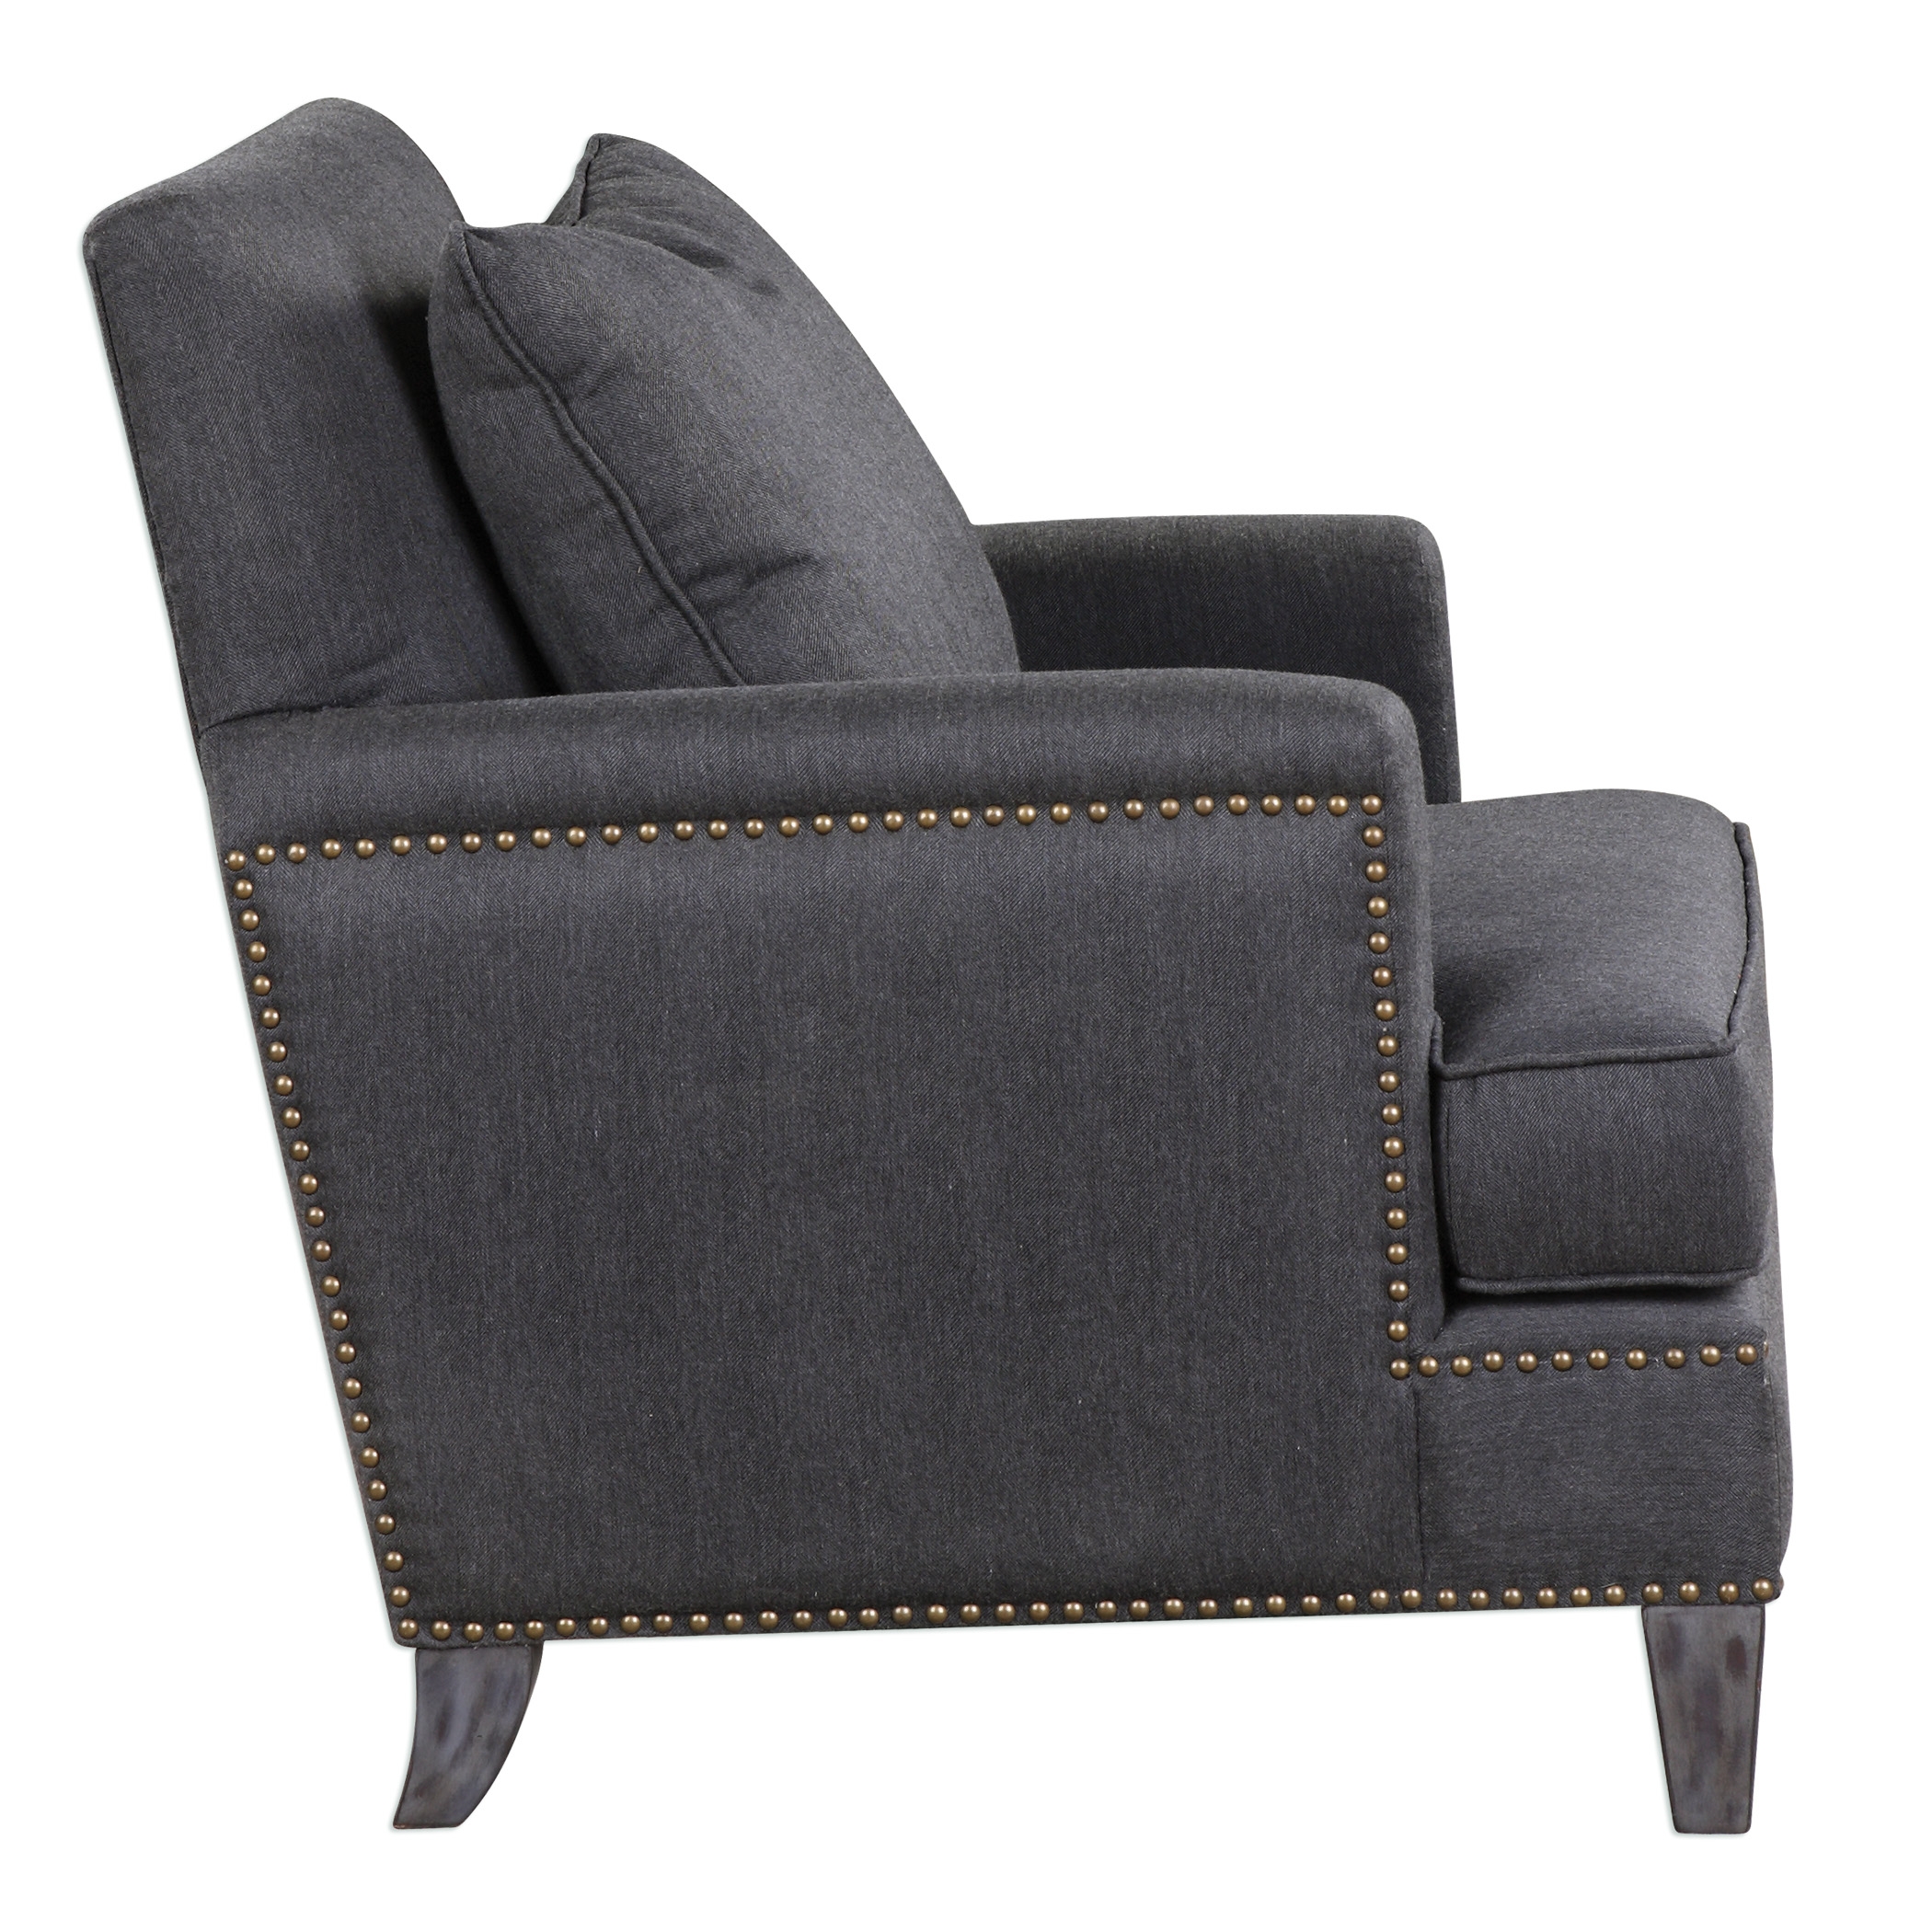 Connolly Charcoal Armchair - Image 3